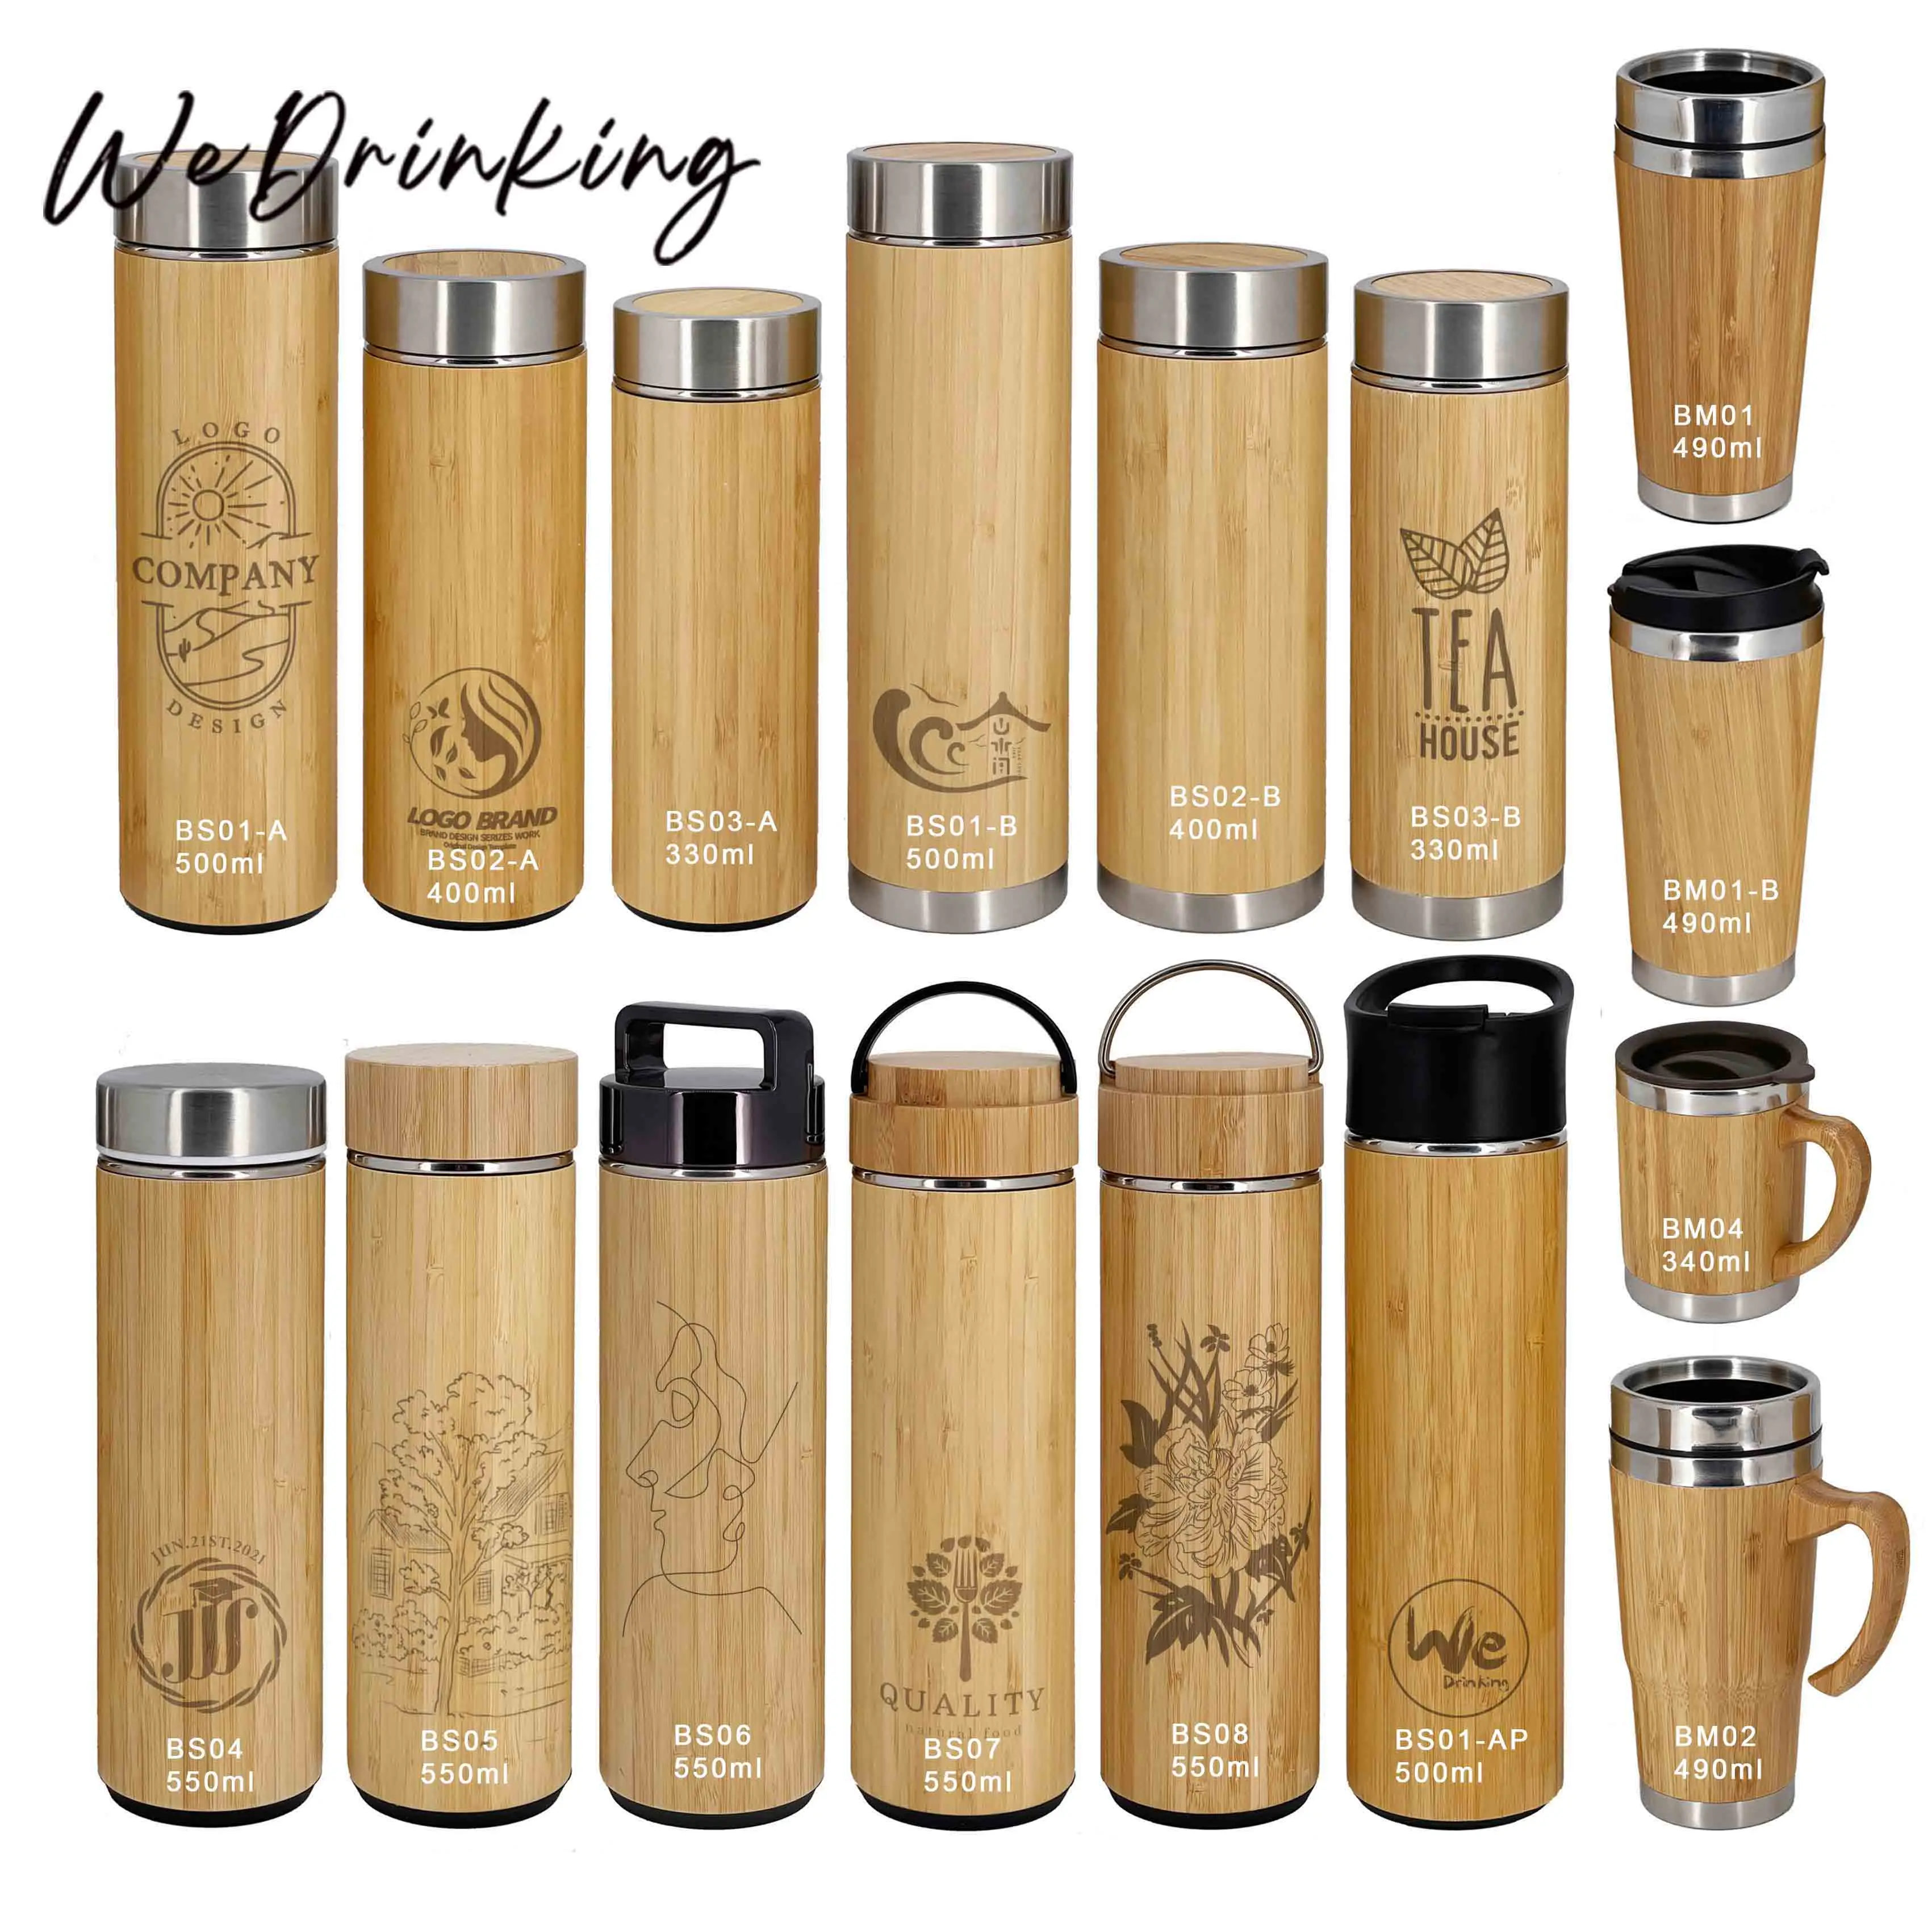 

BS04 550ml Original Natural Vacuum Insulated Bamboo Flask with Tea Infuser and Strainer